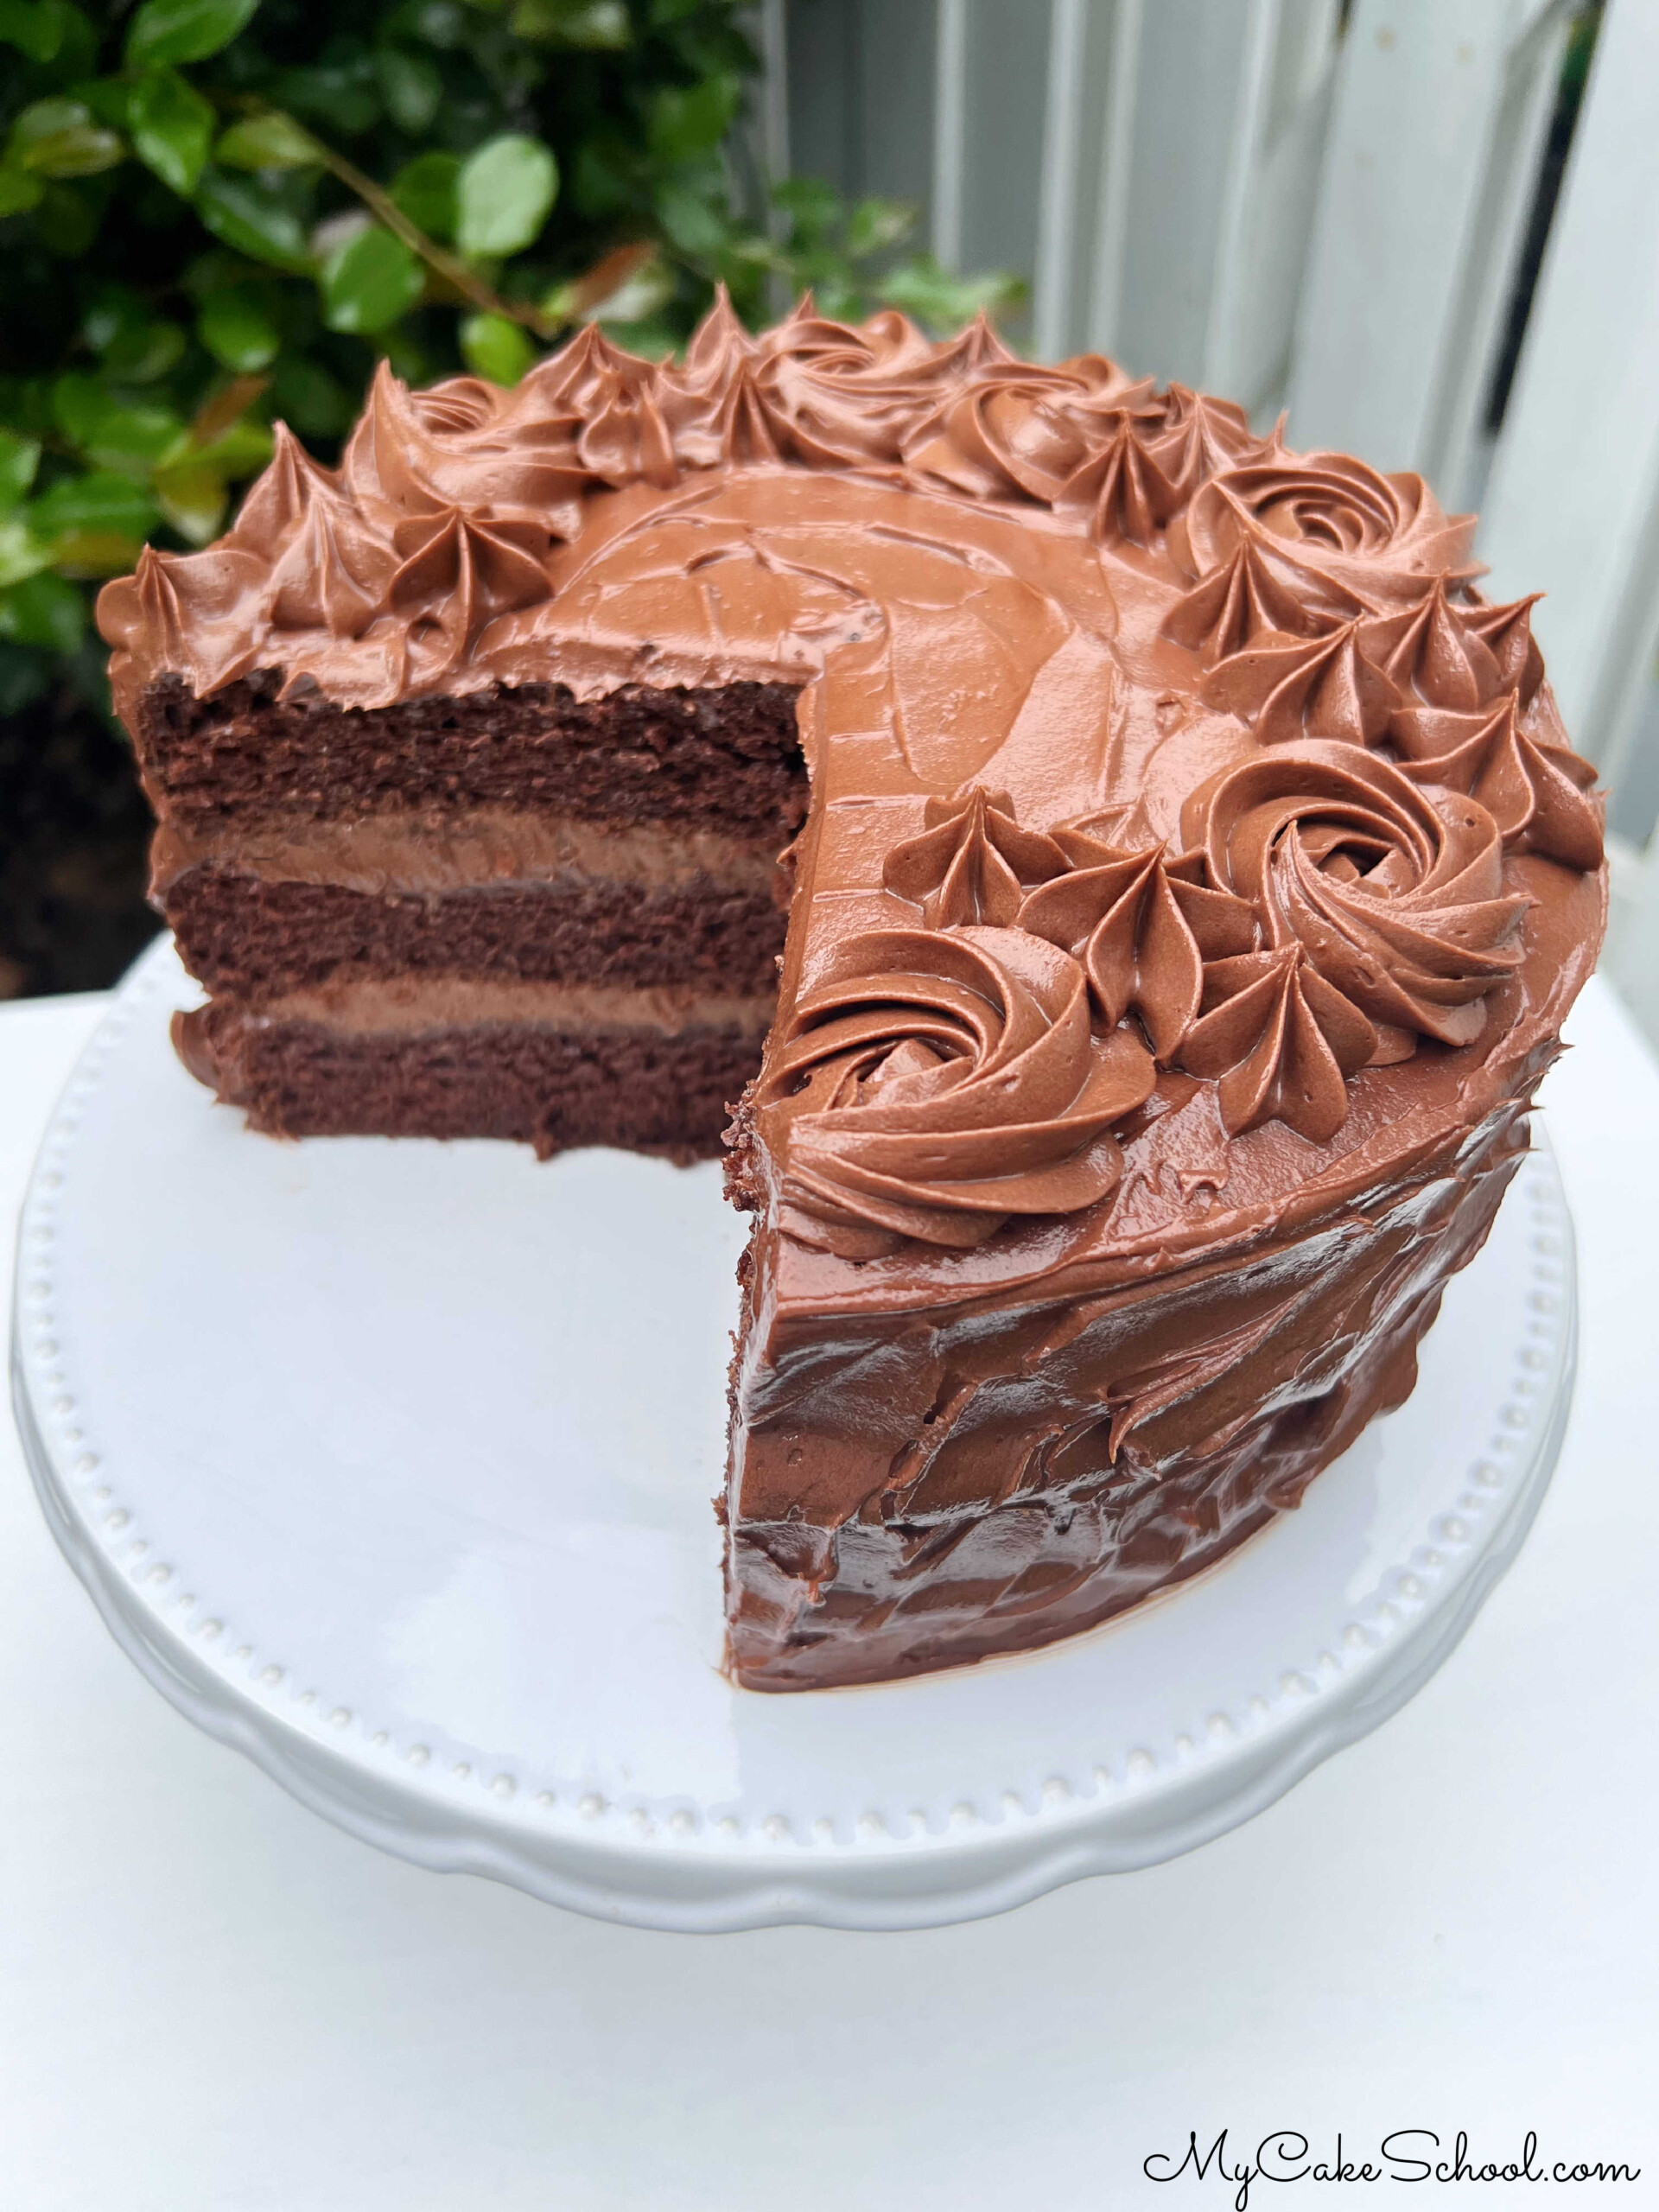 Chocolate Mousse Cake, sliced, on a pedestal.